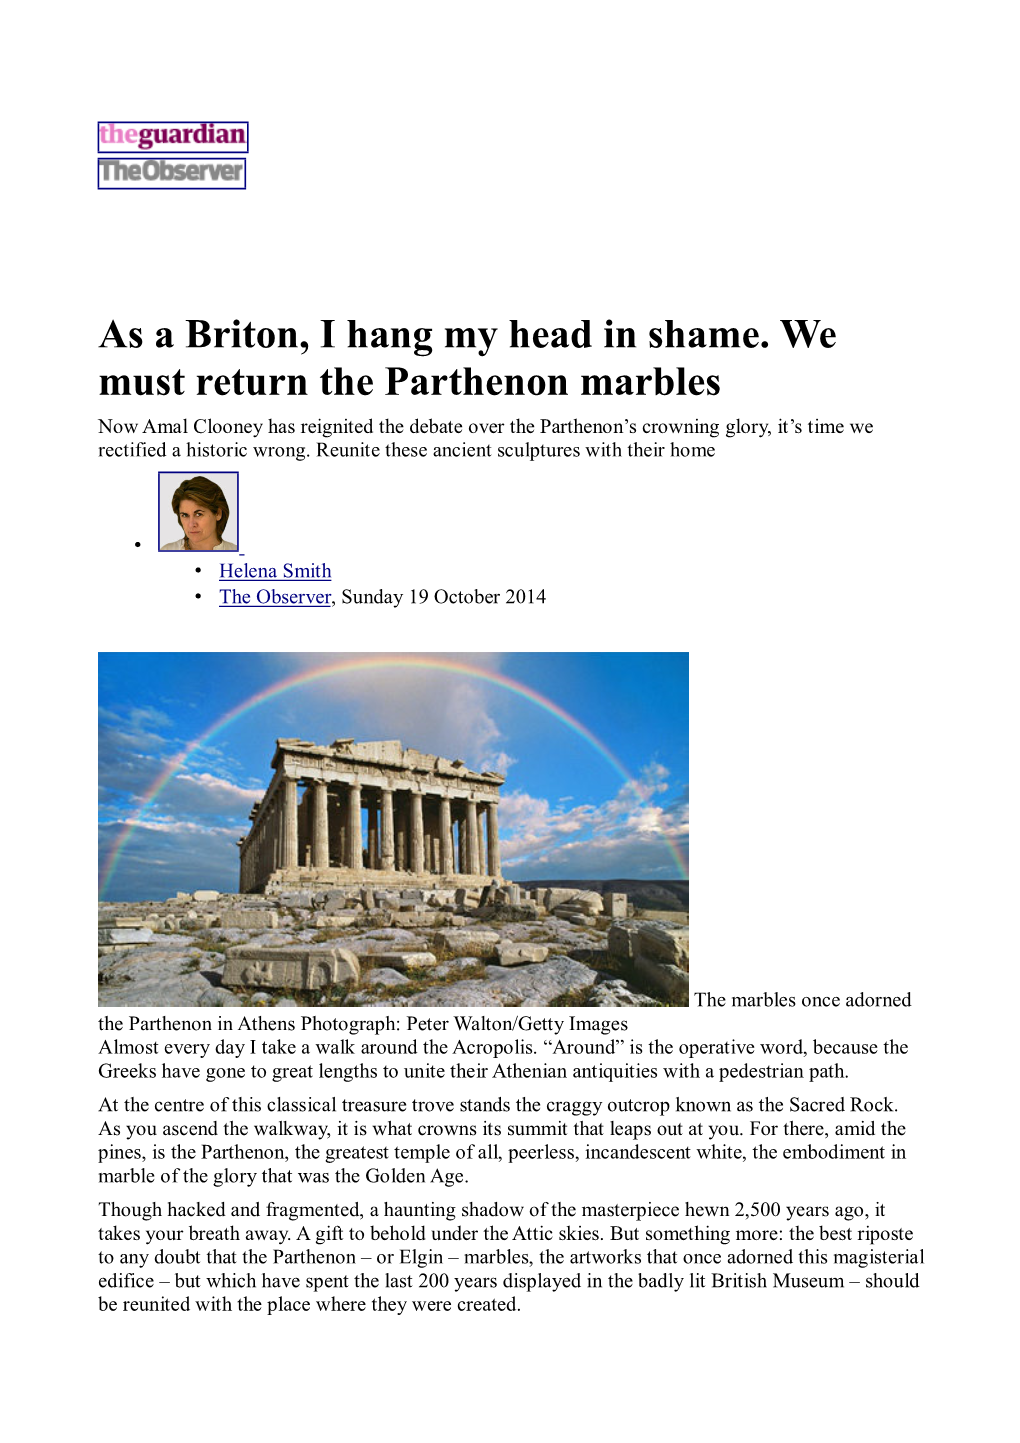 As a Briton, I Hang My Head in Shame. We Must Return the Parthenon Marbles